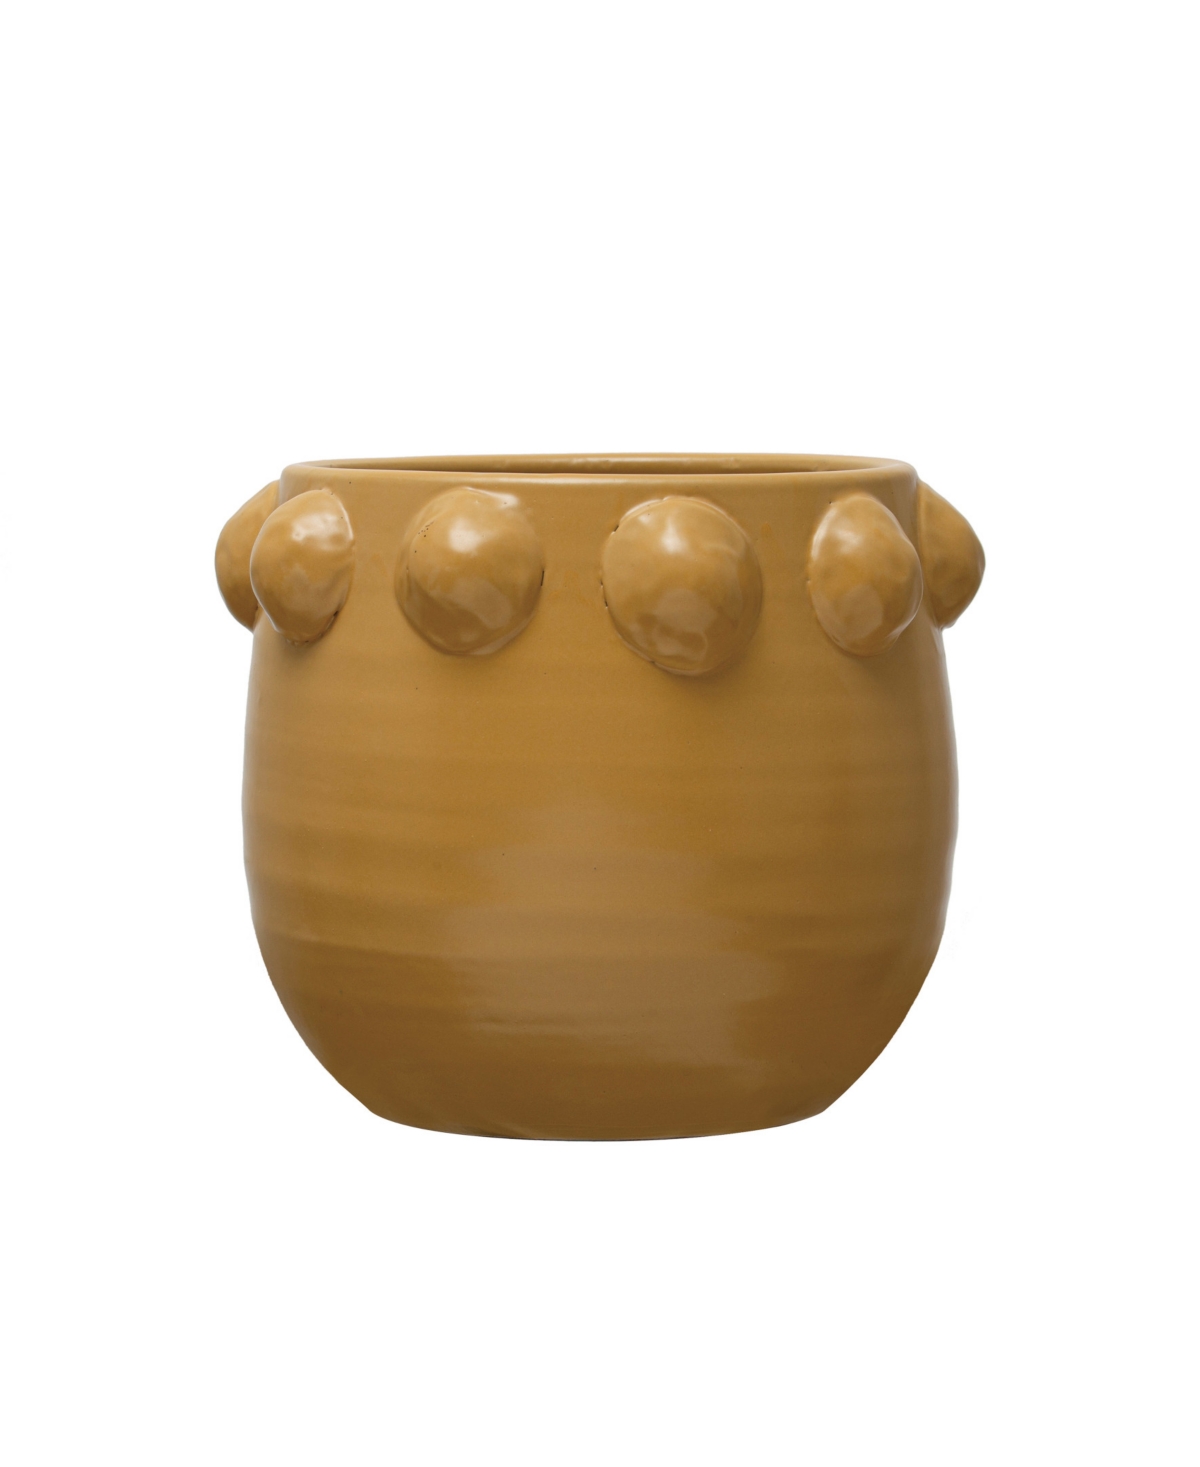 Terracotta Planter with Raised Dots - Yellow